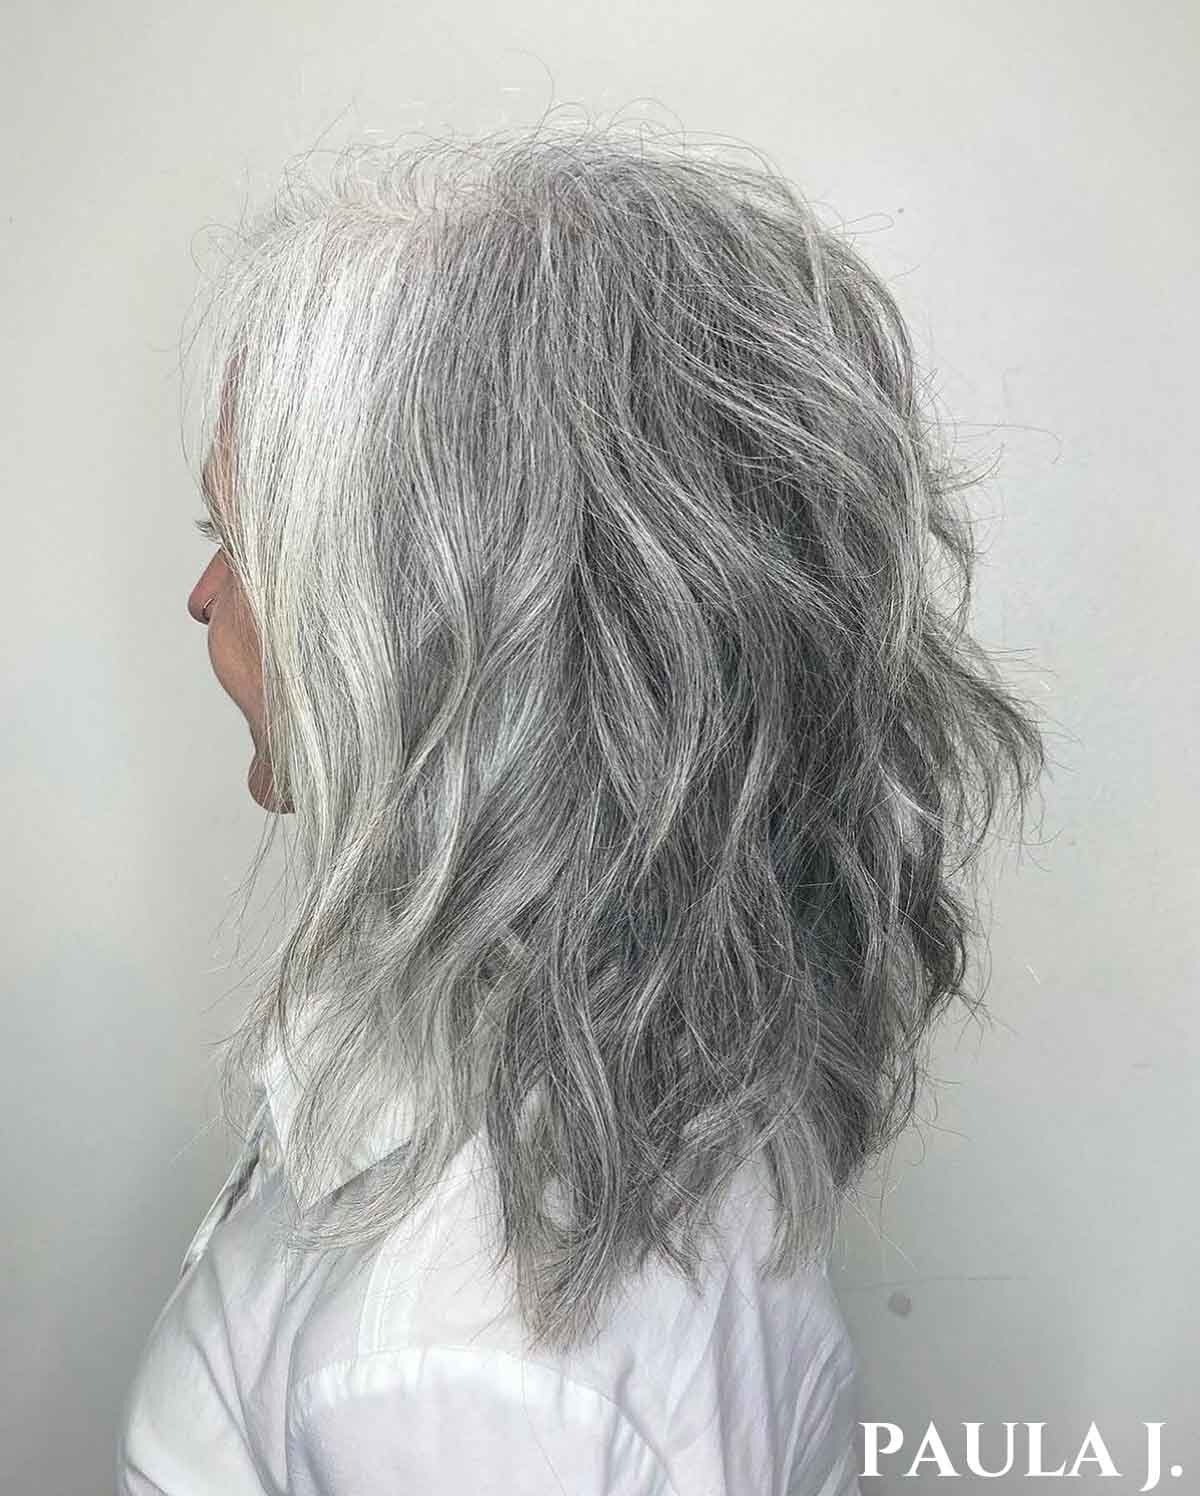 Woman facing left with short wavy silver hair.